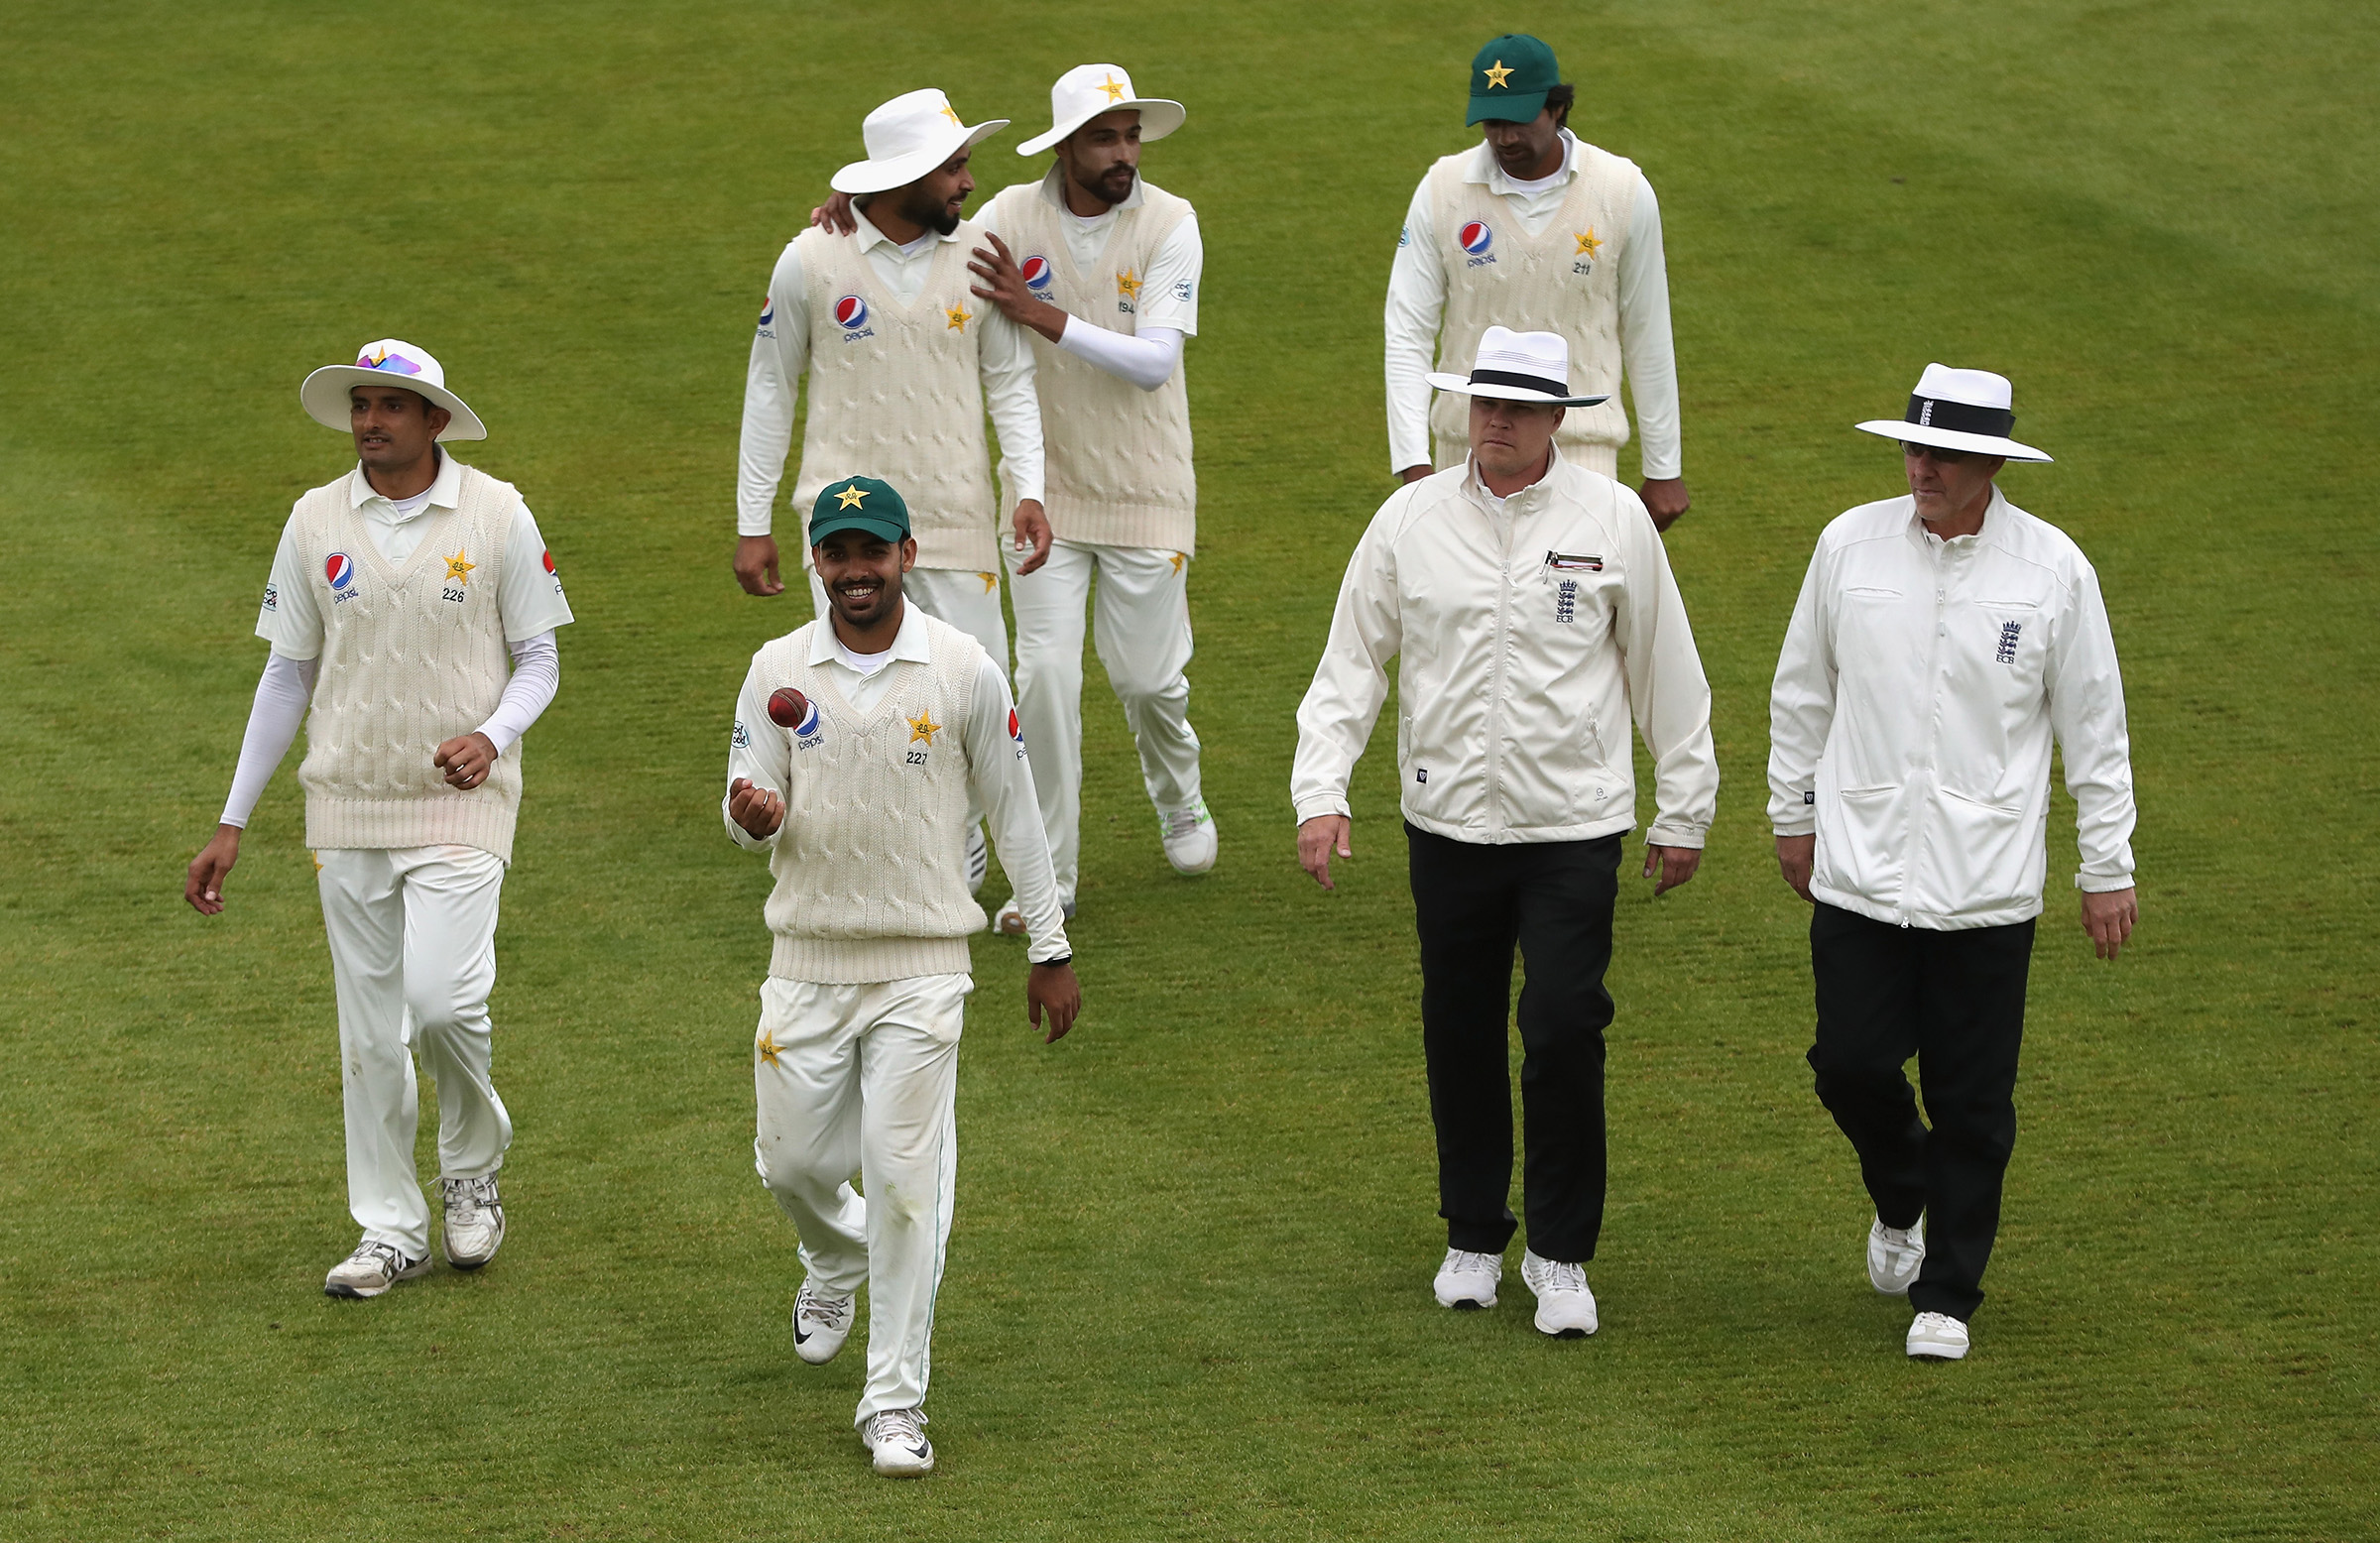 Shadab Khan walking out after the career-best bowling spell of 10 for 157 runs vs Northamptonshire